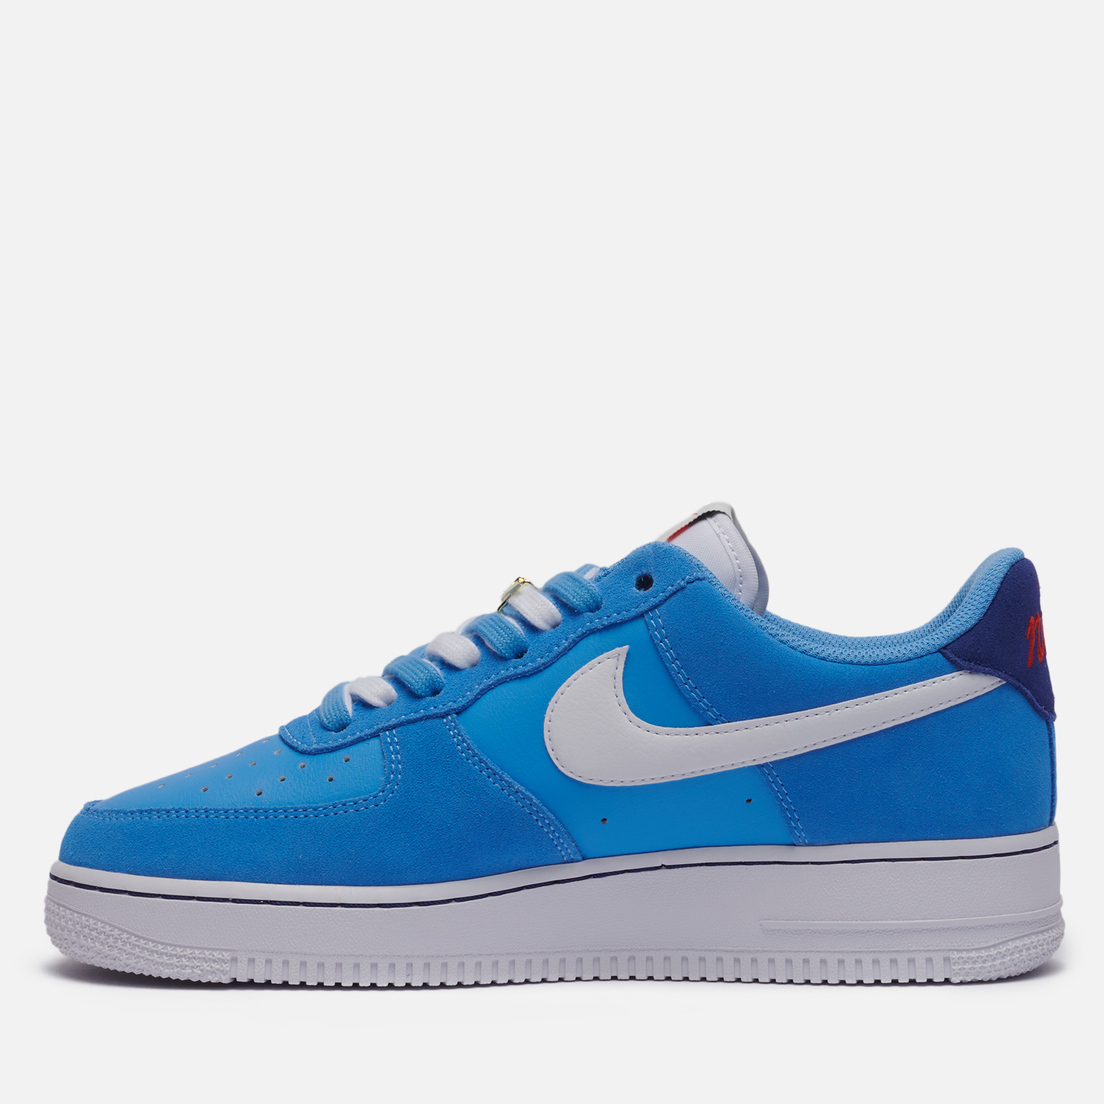 Nike Мужские кроссовки Air Force 1 07 Low First Use